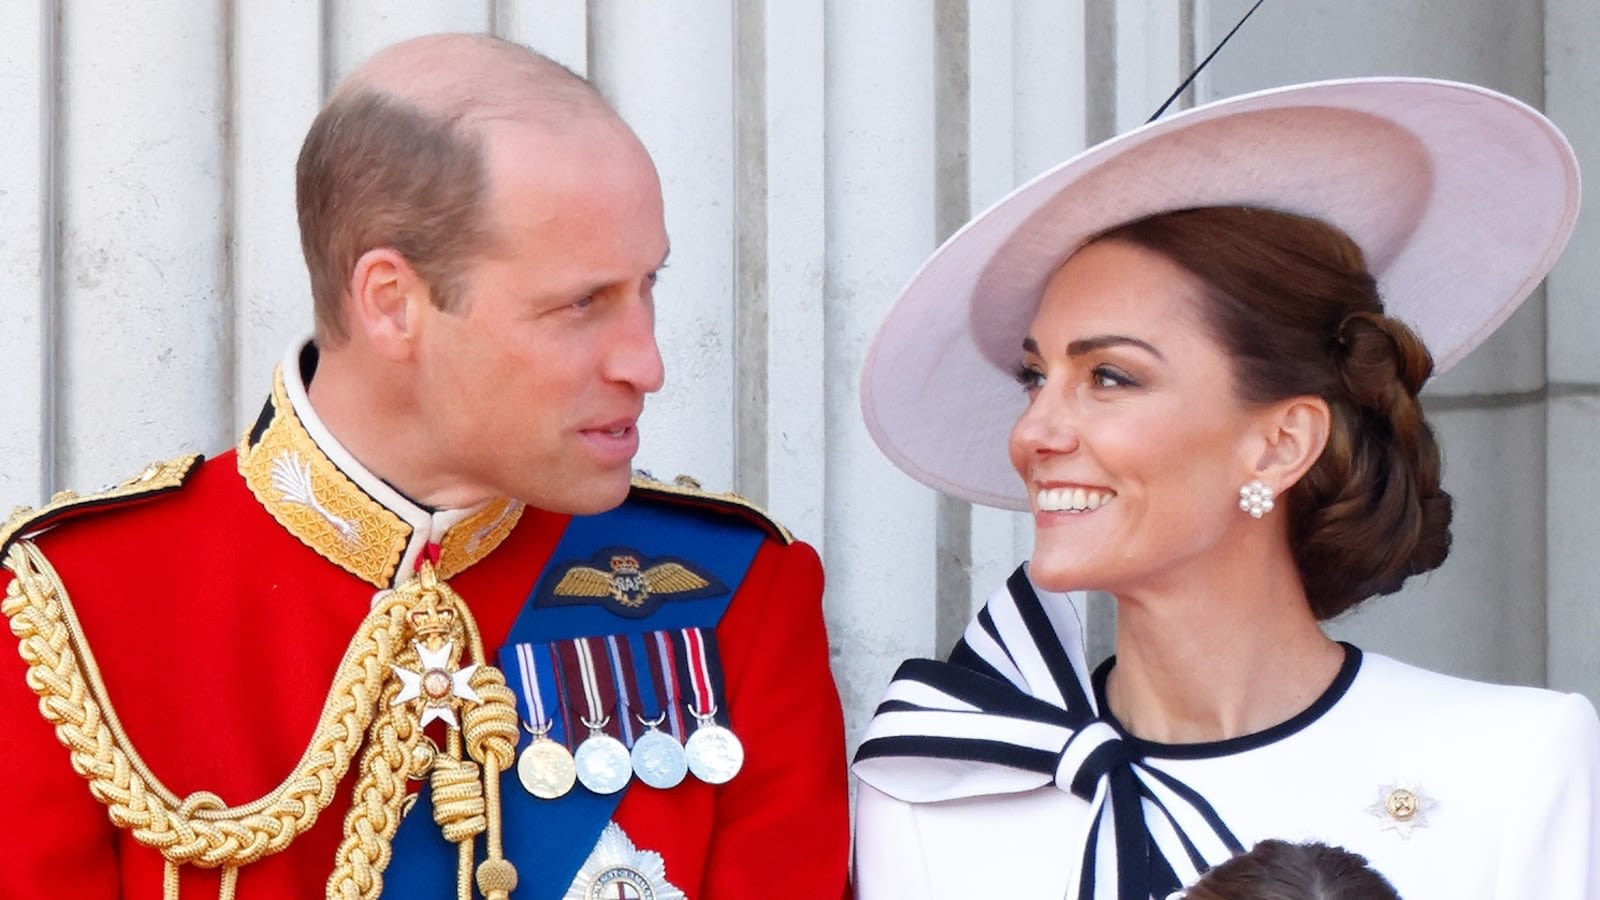 Prince William once broke up with Kate Middleton over the phone, new book claims